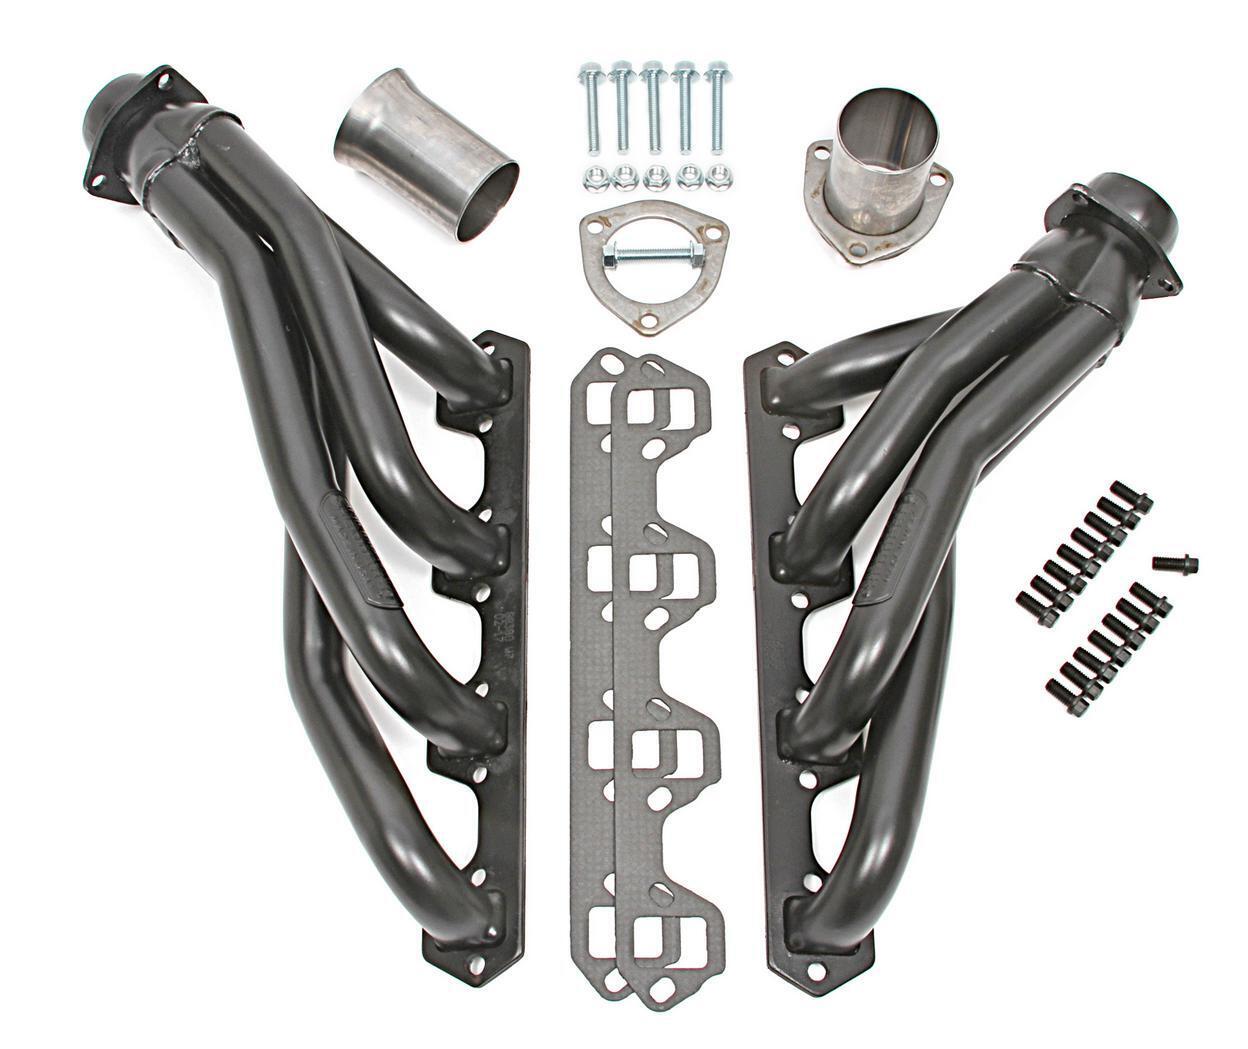 19Fits 79-93 Ford Fox-Body with 302W Headers; 1-1/2 in. Mid-Length Tube- UNCOATE